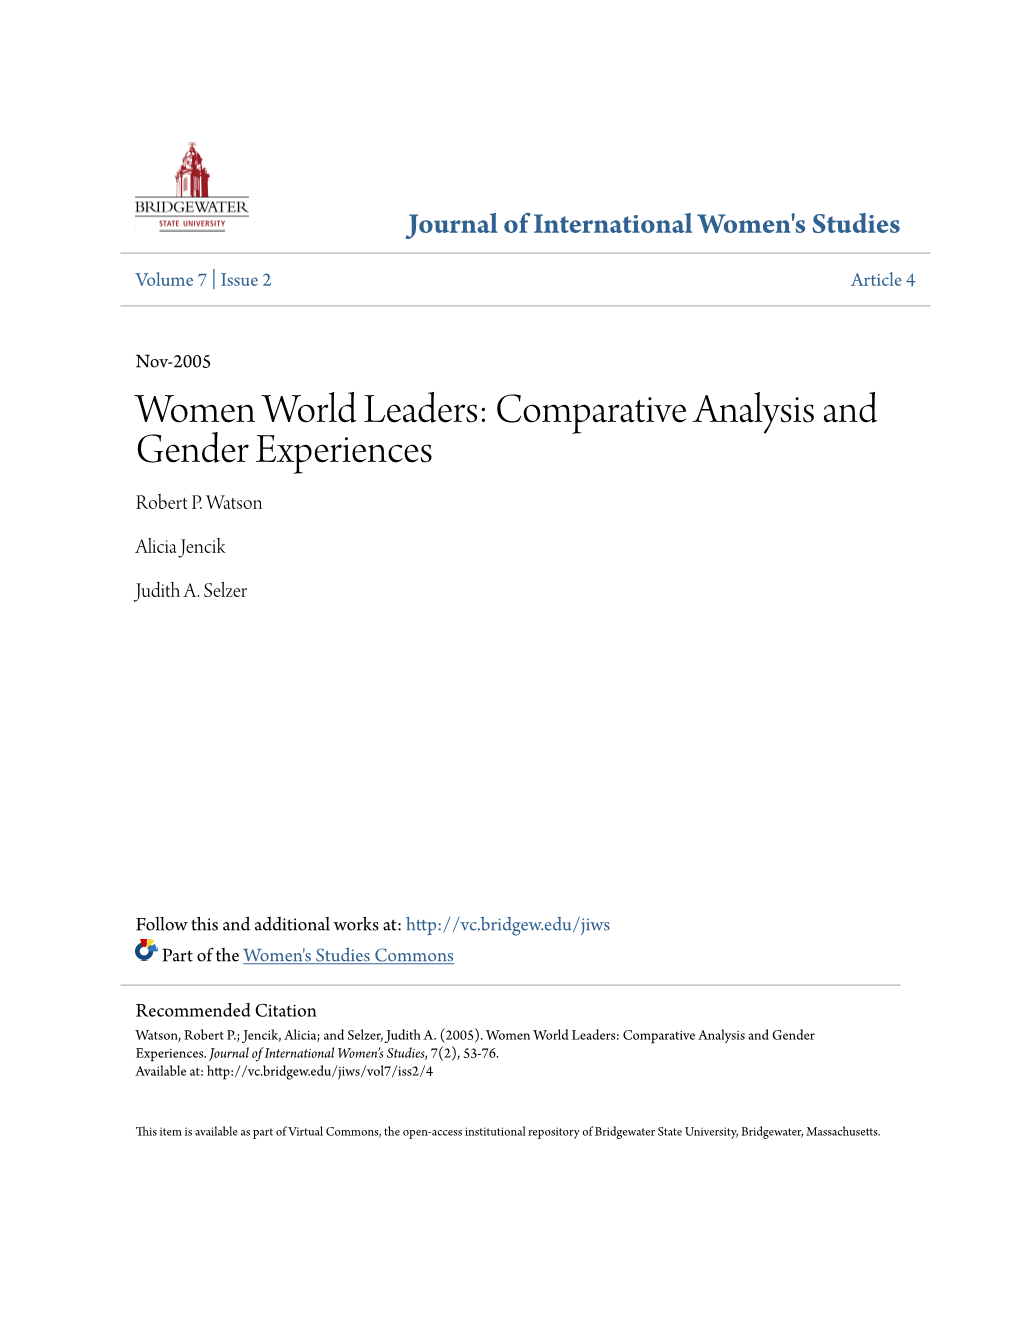 Women World Leaders: Comparative Analysis and Gender Experiences Robert P